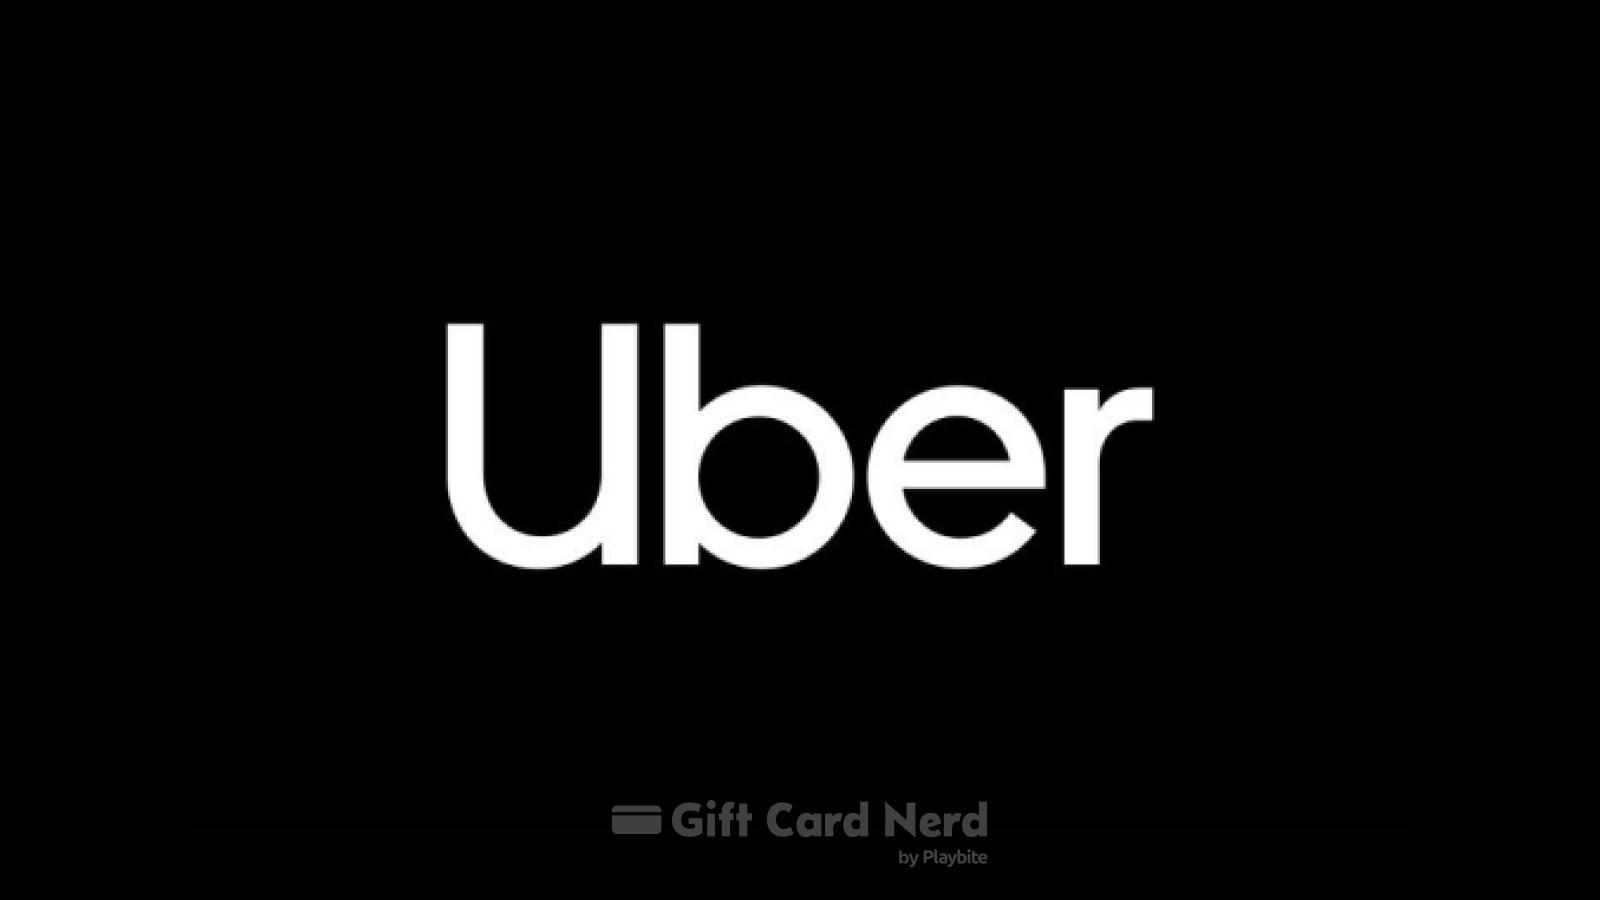 Can I Use an Uber Gift Card on Postmates?